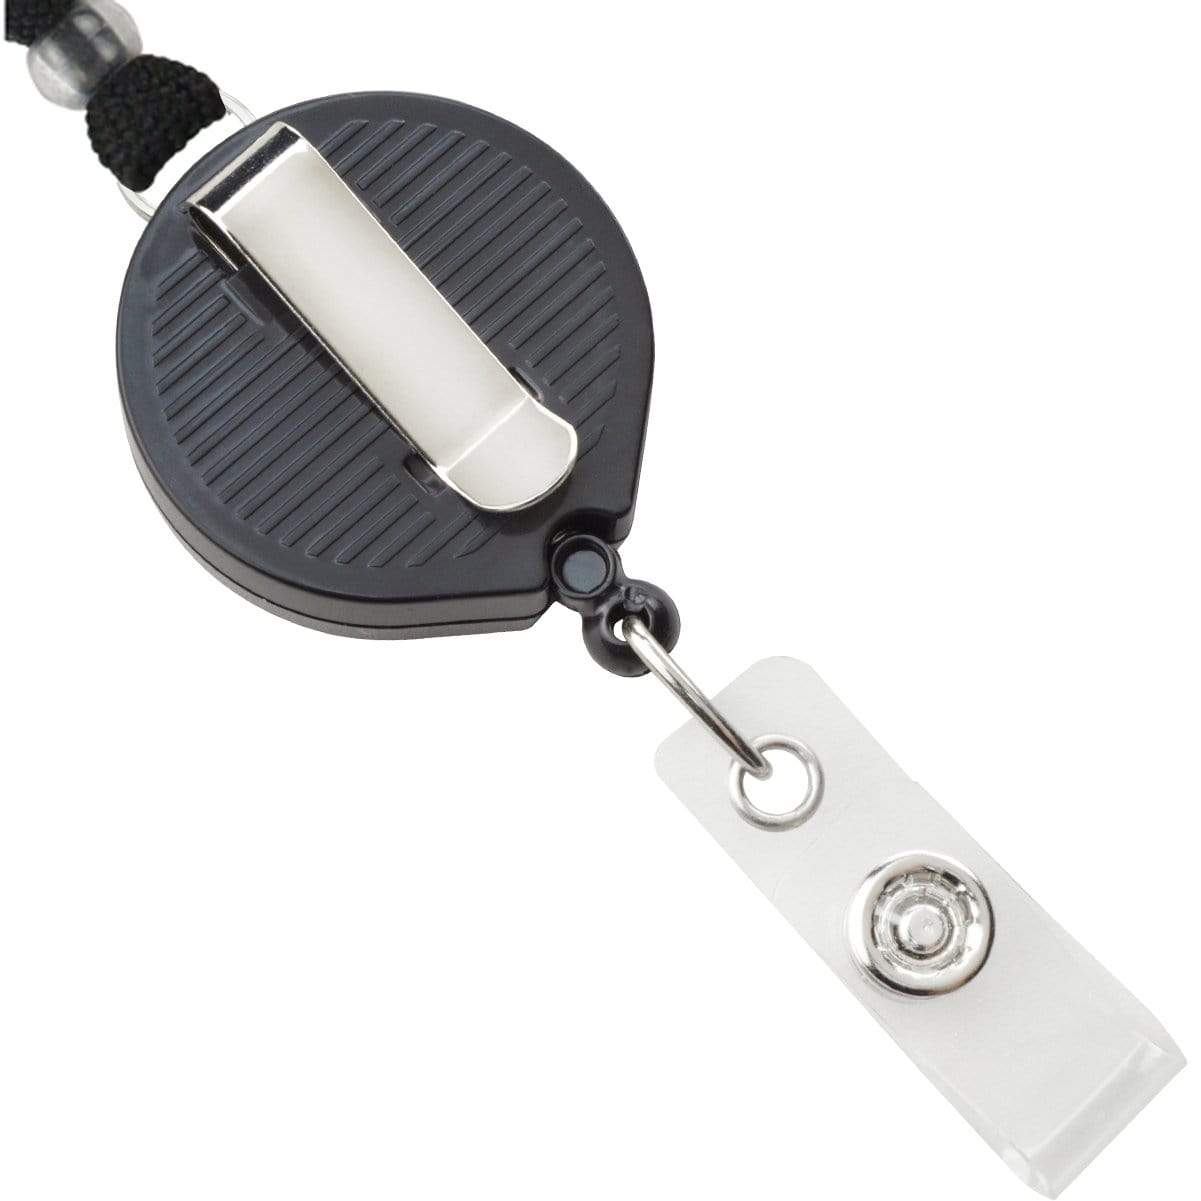 A close-up of a black Breakaway Lanyard ID Holder Badge Reel Combo - Retractable Lanyard (SPID-210X) with a metal clip on its back and a clear plastic strap attachment at the end, ideal for secure ID card display.